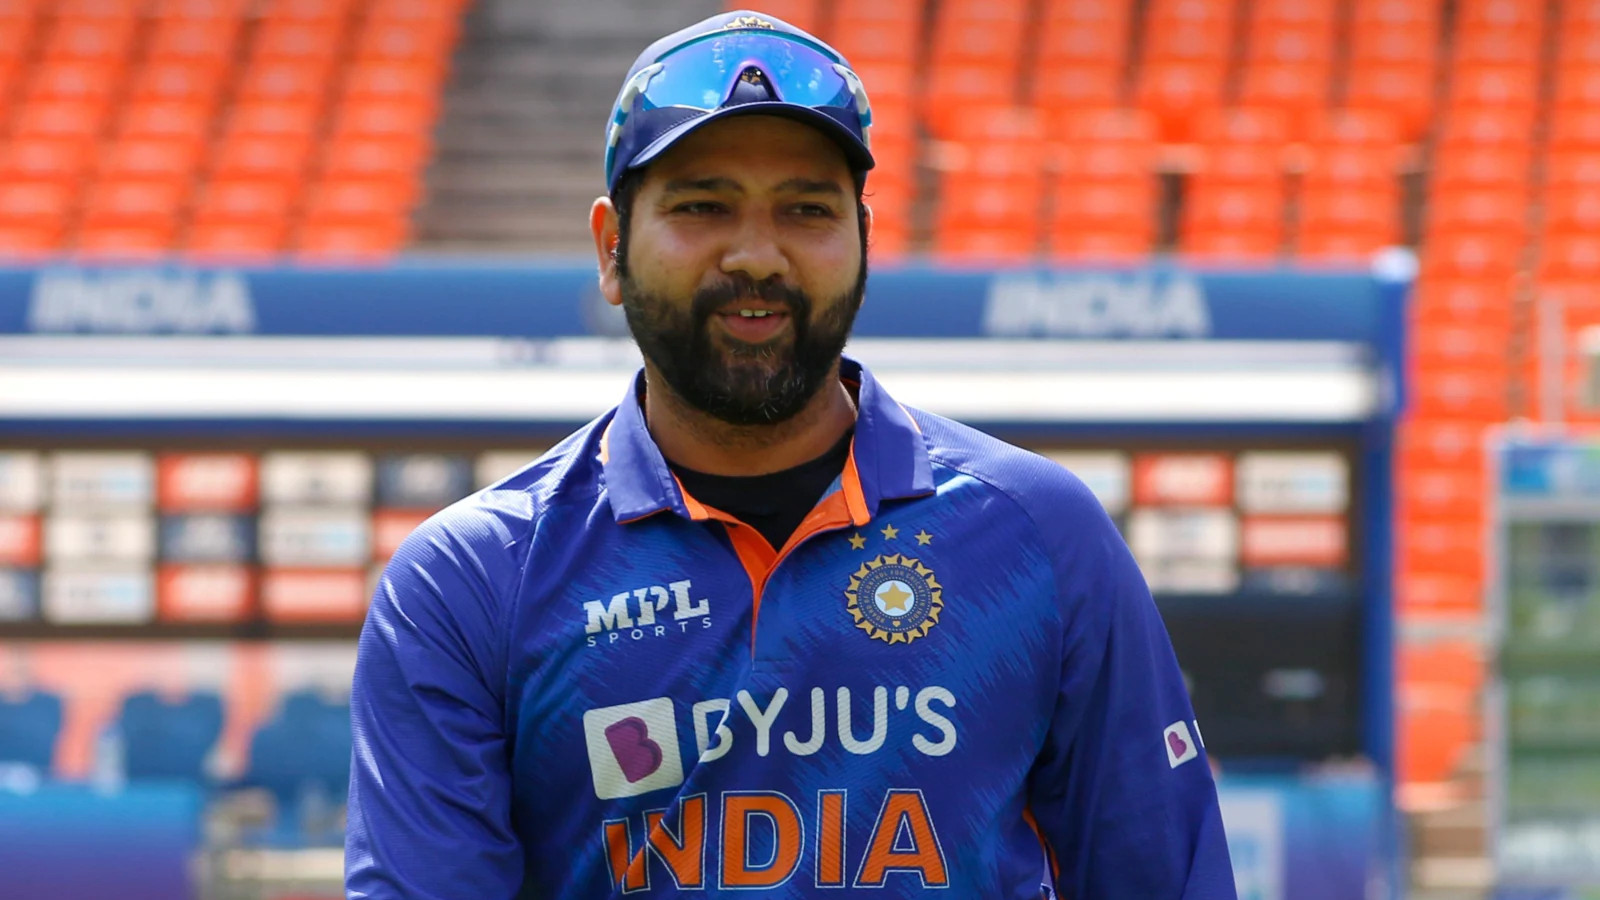 IND v SL 2022: Rohit Sharma says it’s a great feeling to captain the Indian team in all three formats